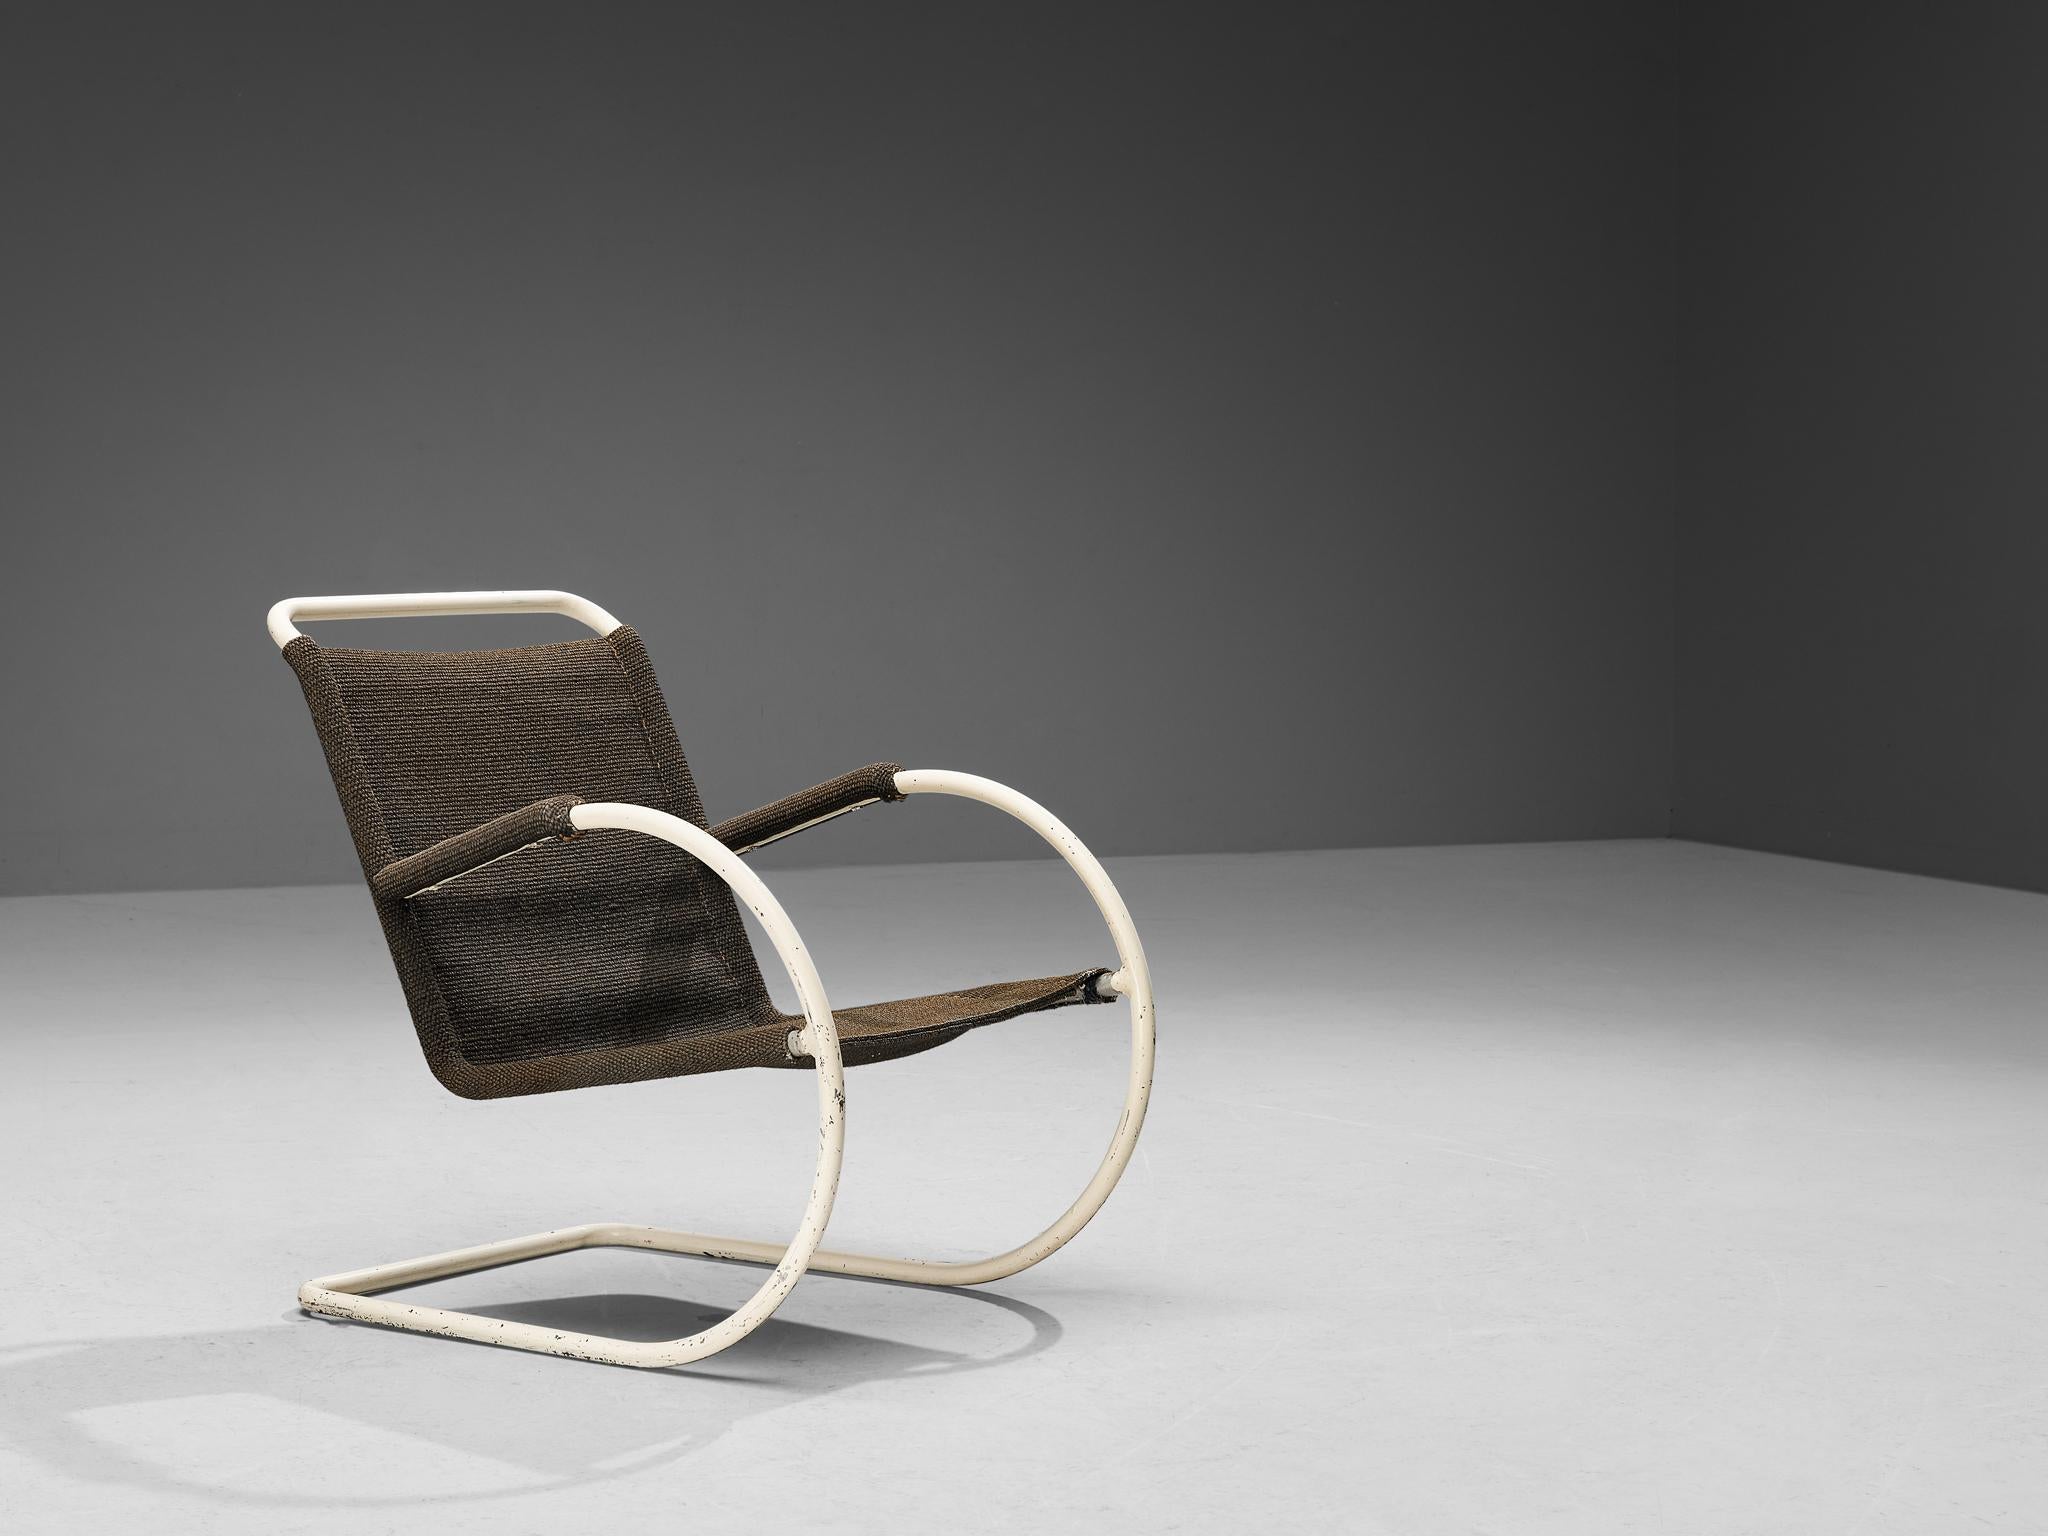 Bas van Pelt for My Home, armchair, lacquered steel, sisal, The Netherlands, circa 1934

This original comfortable lounge chair is designed by the Dutch interior and furniture designer Bas van Pelt (1900-1945). The construction of this particular